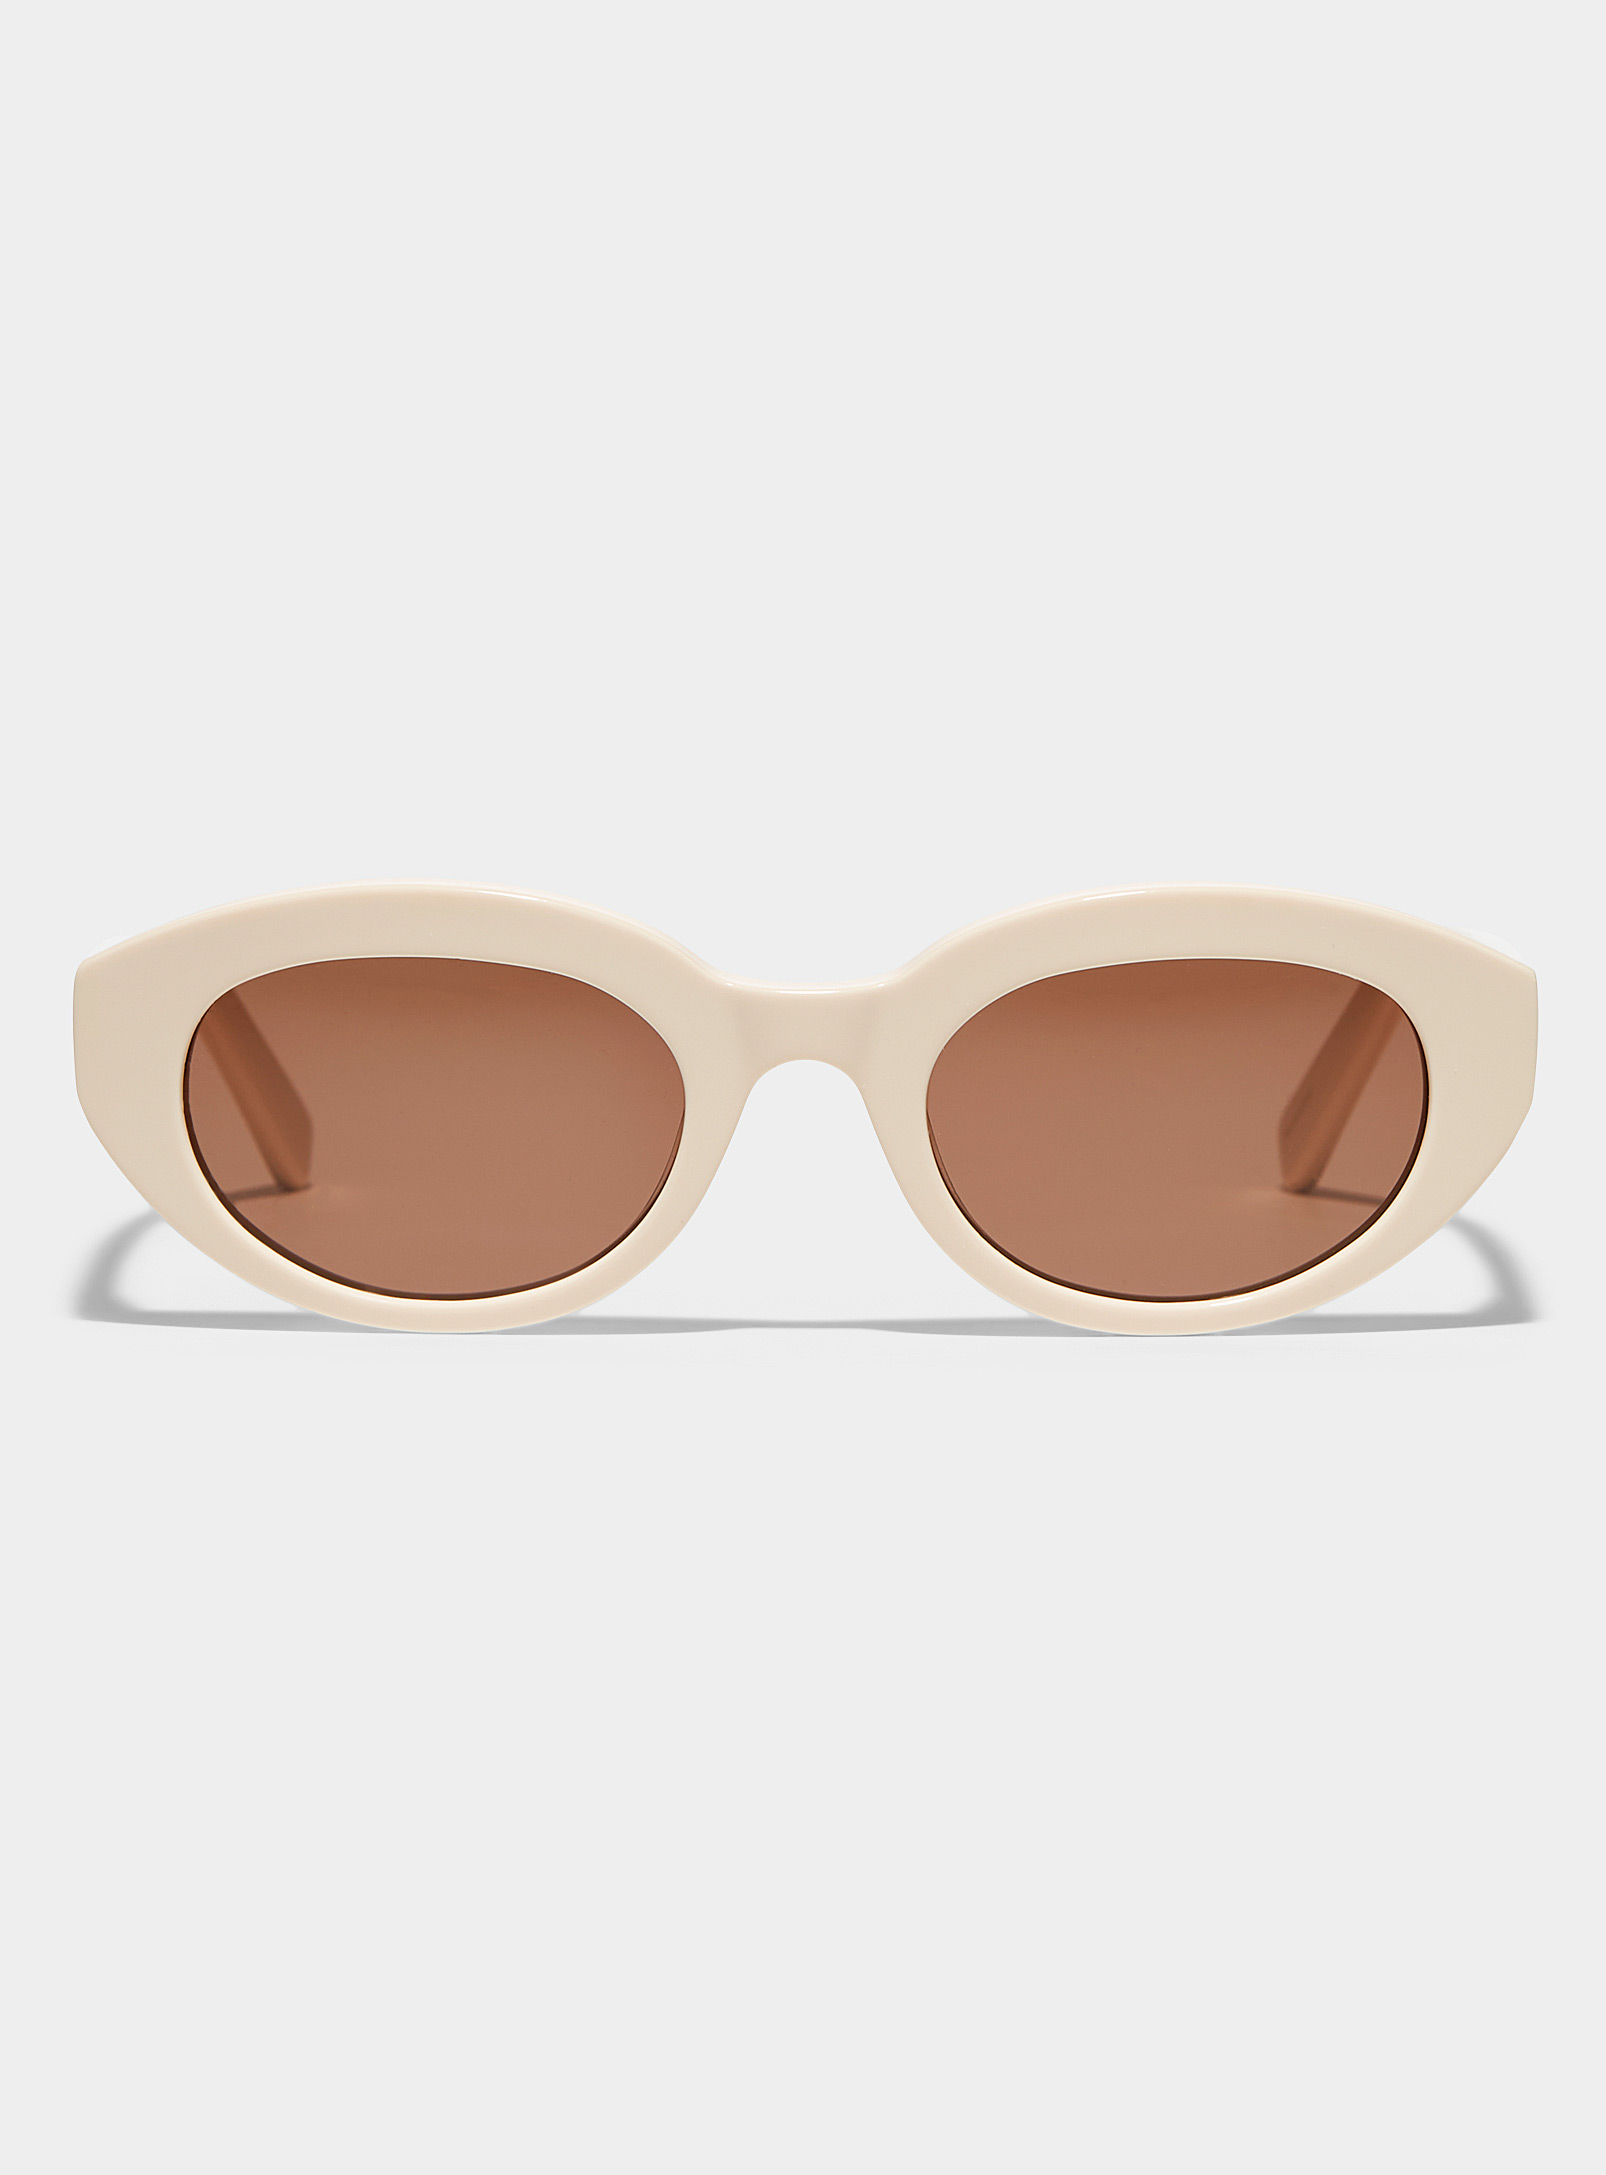 French Kiwis Monroe Oval Sunglasses In Neutral